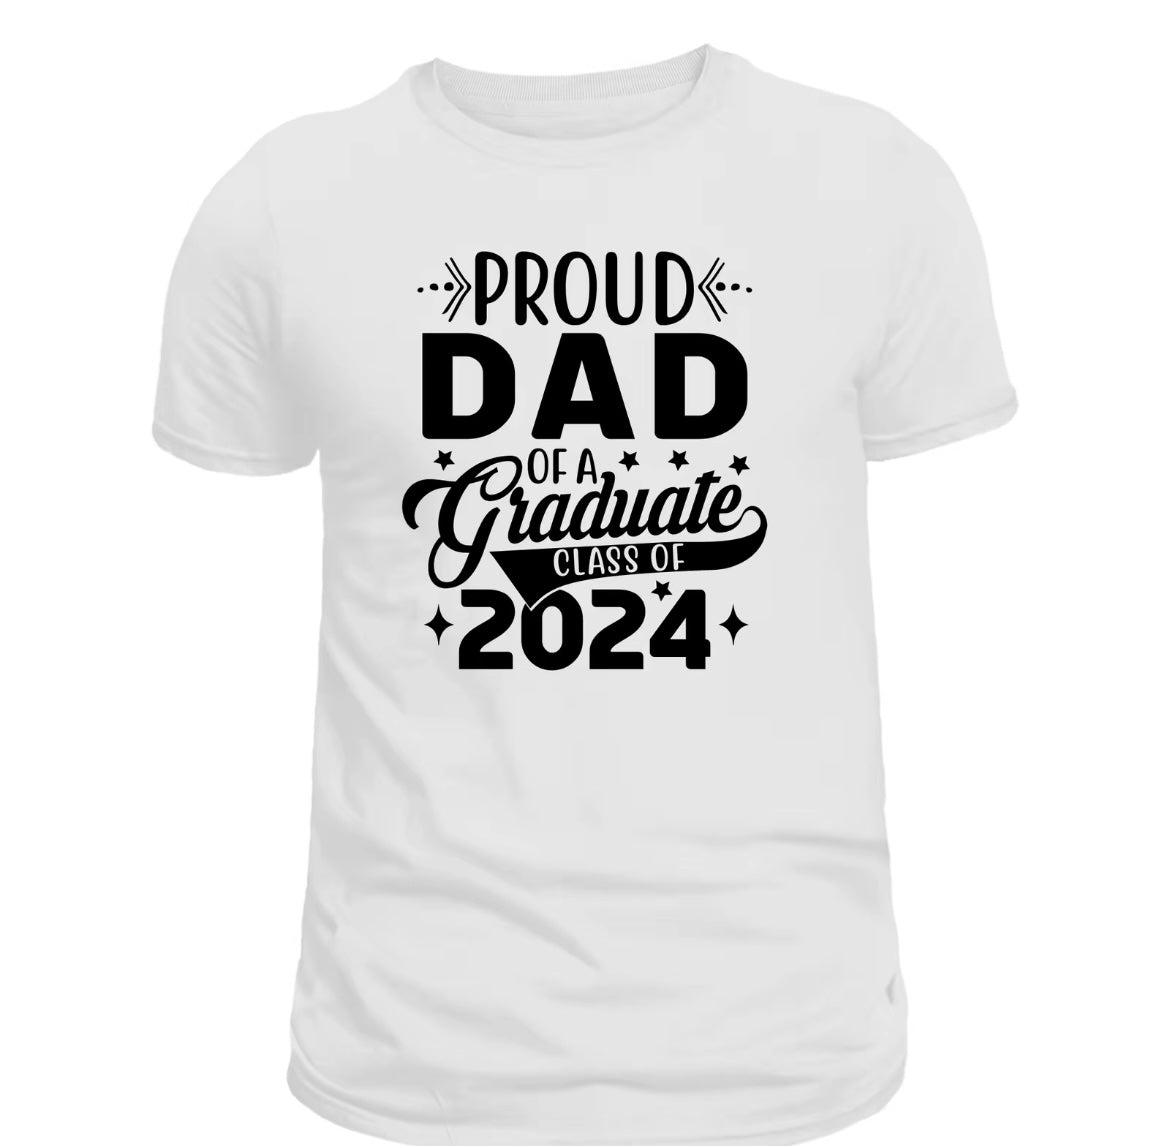 Proud Mom and Dad T-Shirts